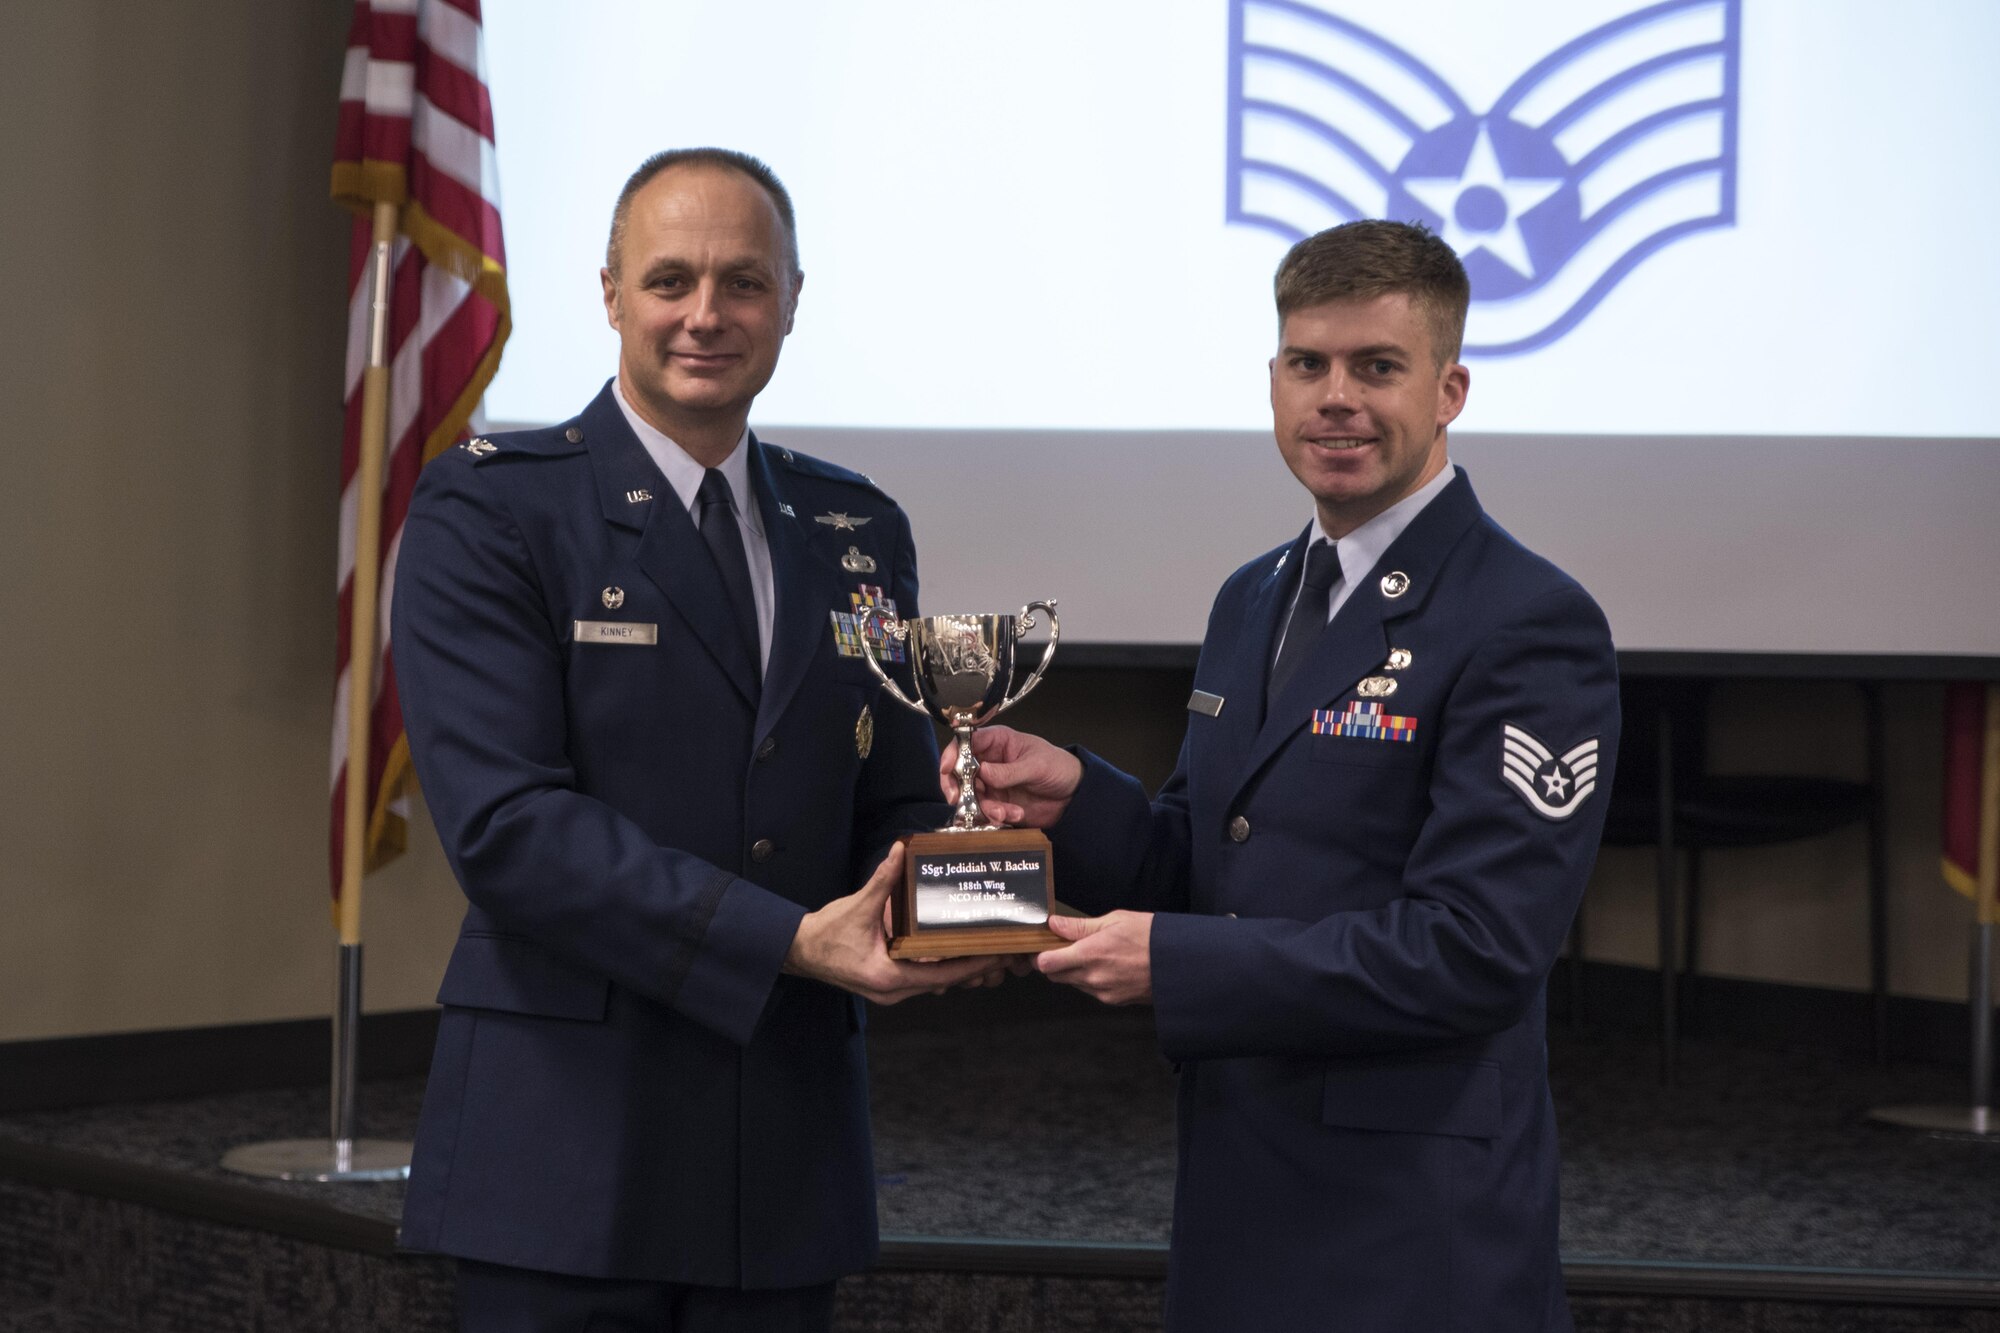 Staff Sgt. Jedidiah Backus accepts the Noncommissioned officer of the Year award from Col. Robert Kinney, 188th Wing commander, Nov. 4, 2017, at Ebbing Air National Guard Base, Fort Smith, Ark. The award is given to airmen that have provided exceptional service to the wing throughout the last year and distinguished themselves among the best in the 188th. Winners were selected in the Airman, Noncommissioned Officer, Senior NCO, First Sergeant, CGO and Field Grade Officer categories. (U.S. Air National Guard photo by Tech. Sgt. Daniel Condit)